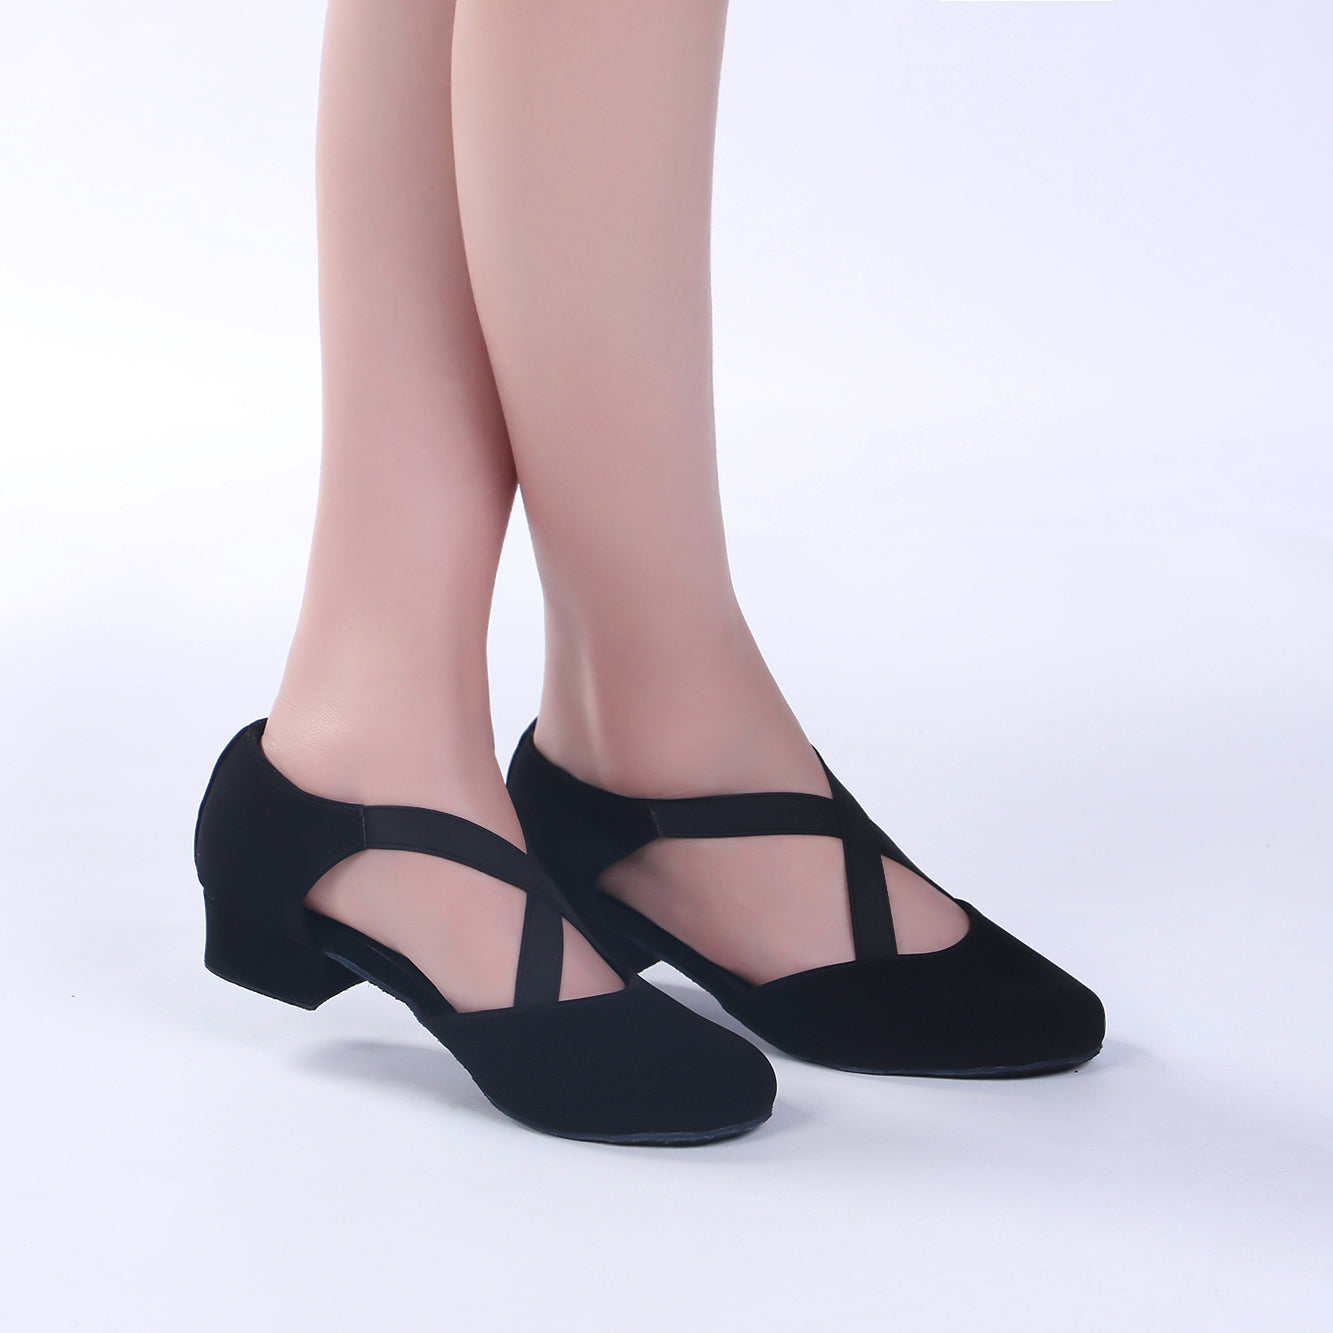 Ladies black low heel ballroom dancing shoes with suede sole for tango latin practice, closed-toe design (PD7307B)3